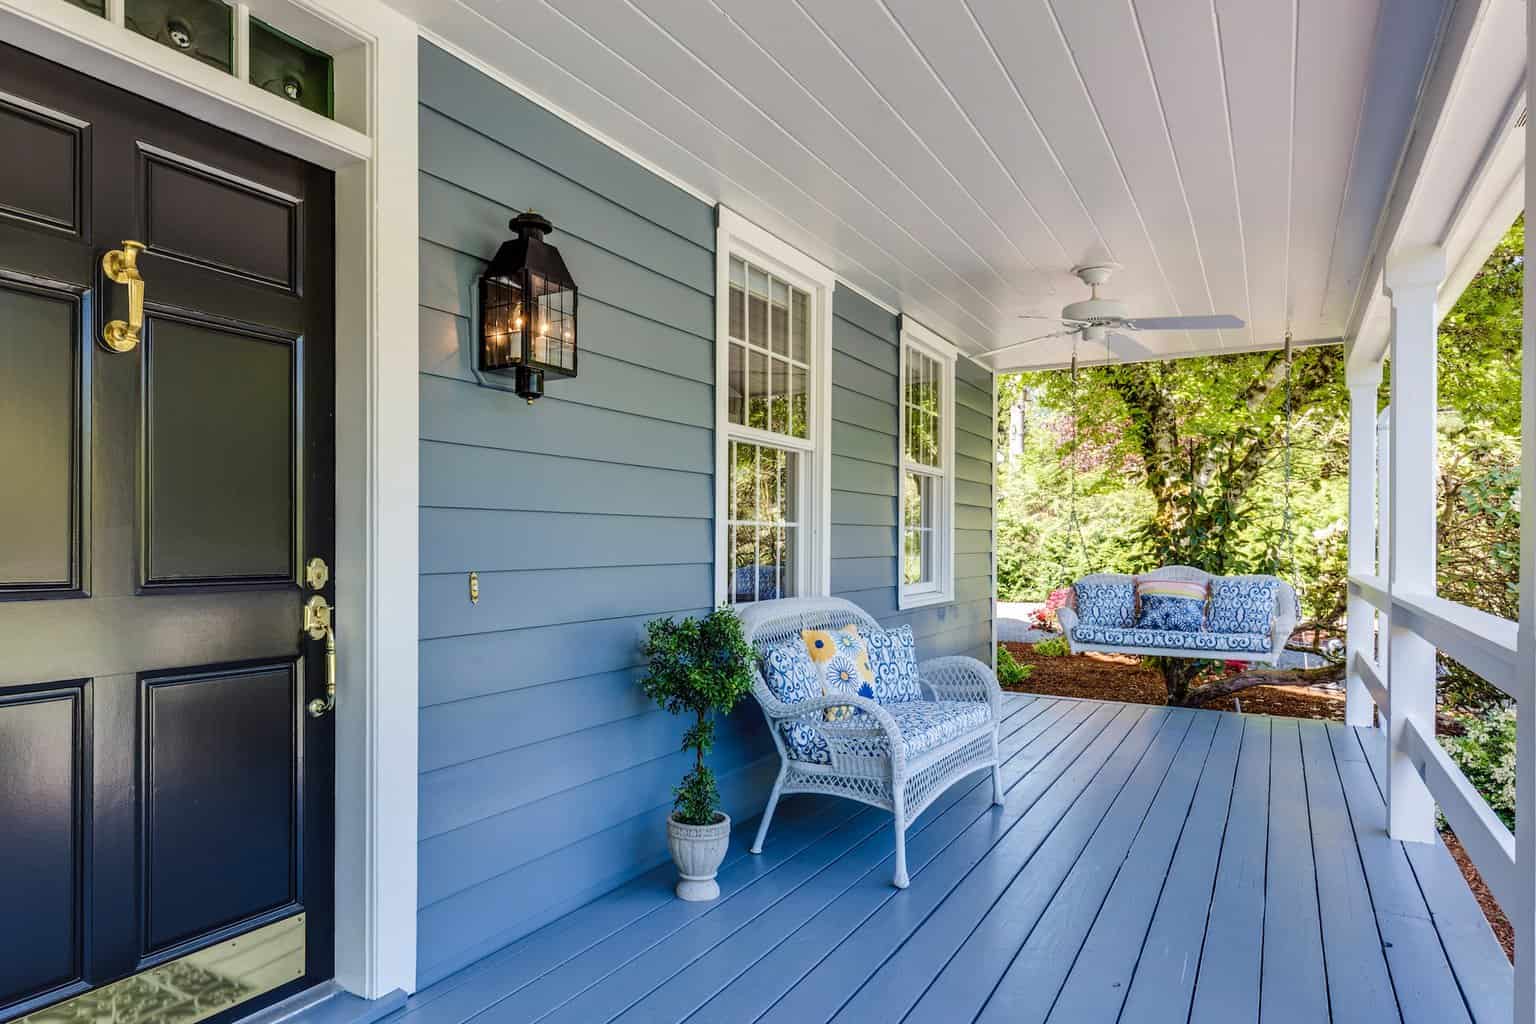 A welcoming front porch with a bold black modern style entry door with gold fixtures.